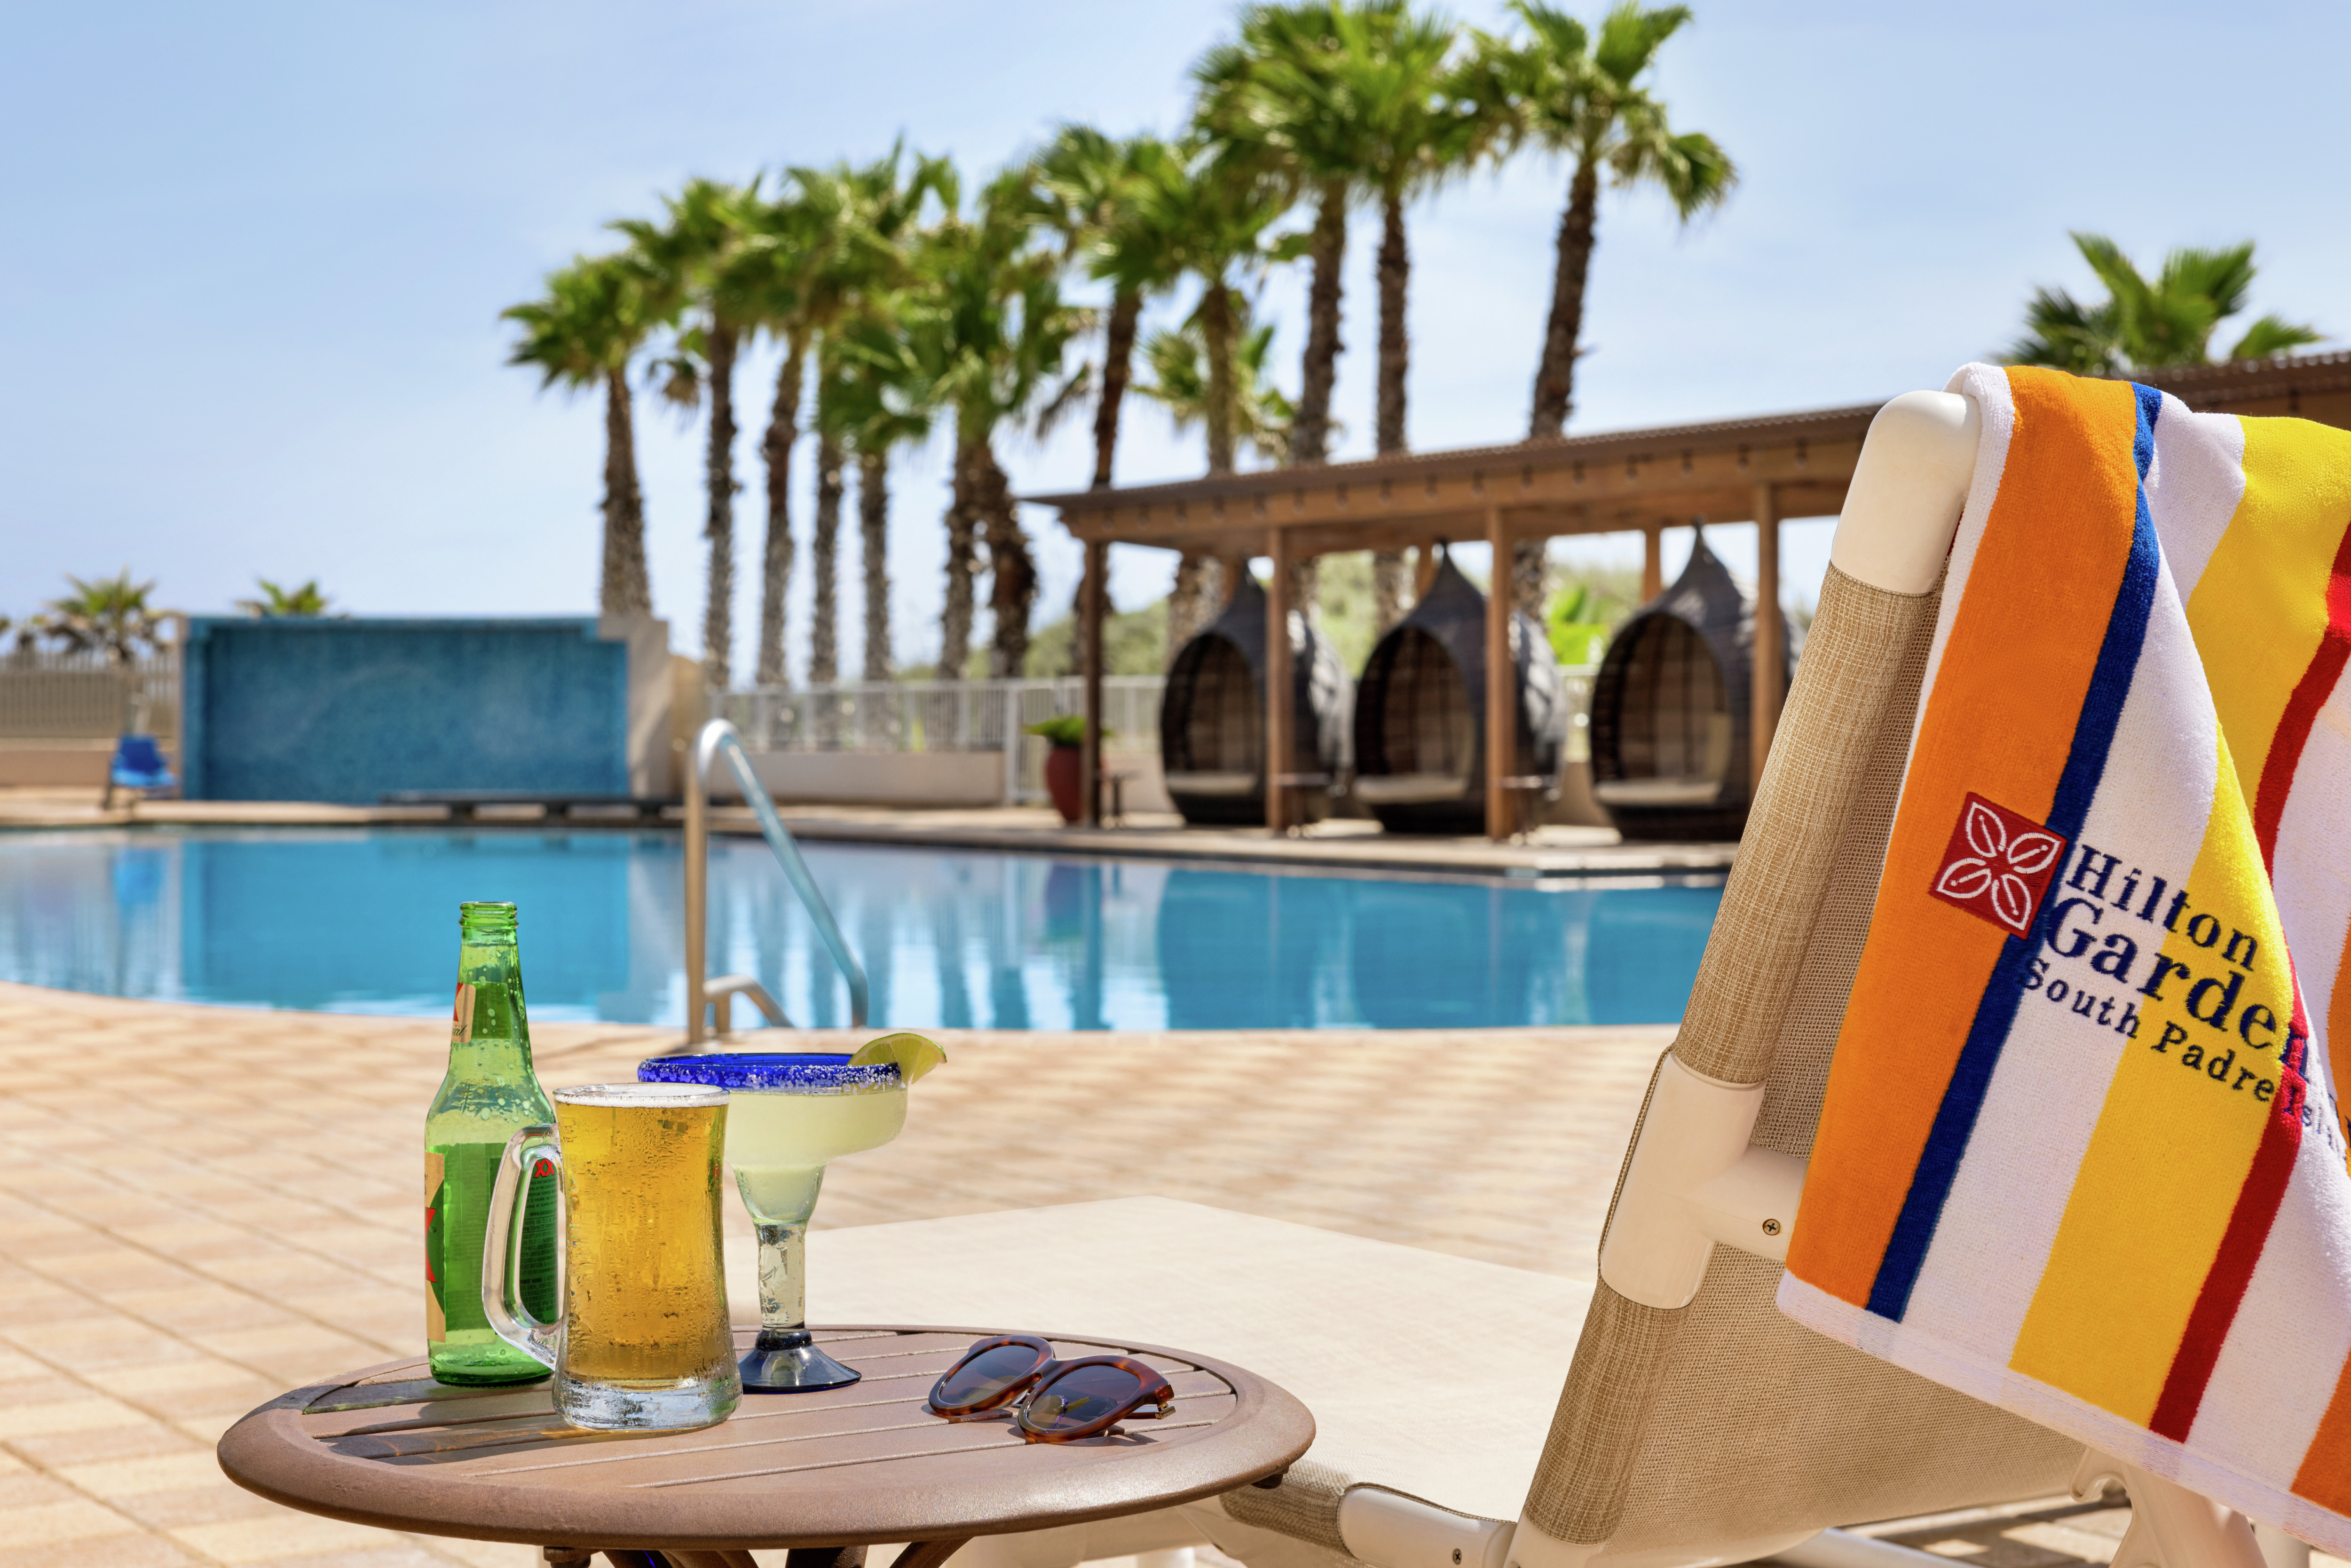 Relaxing poolside with delicious beverages from the bar.